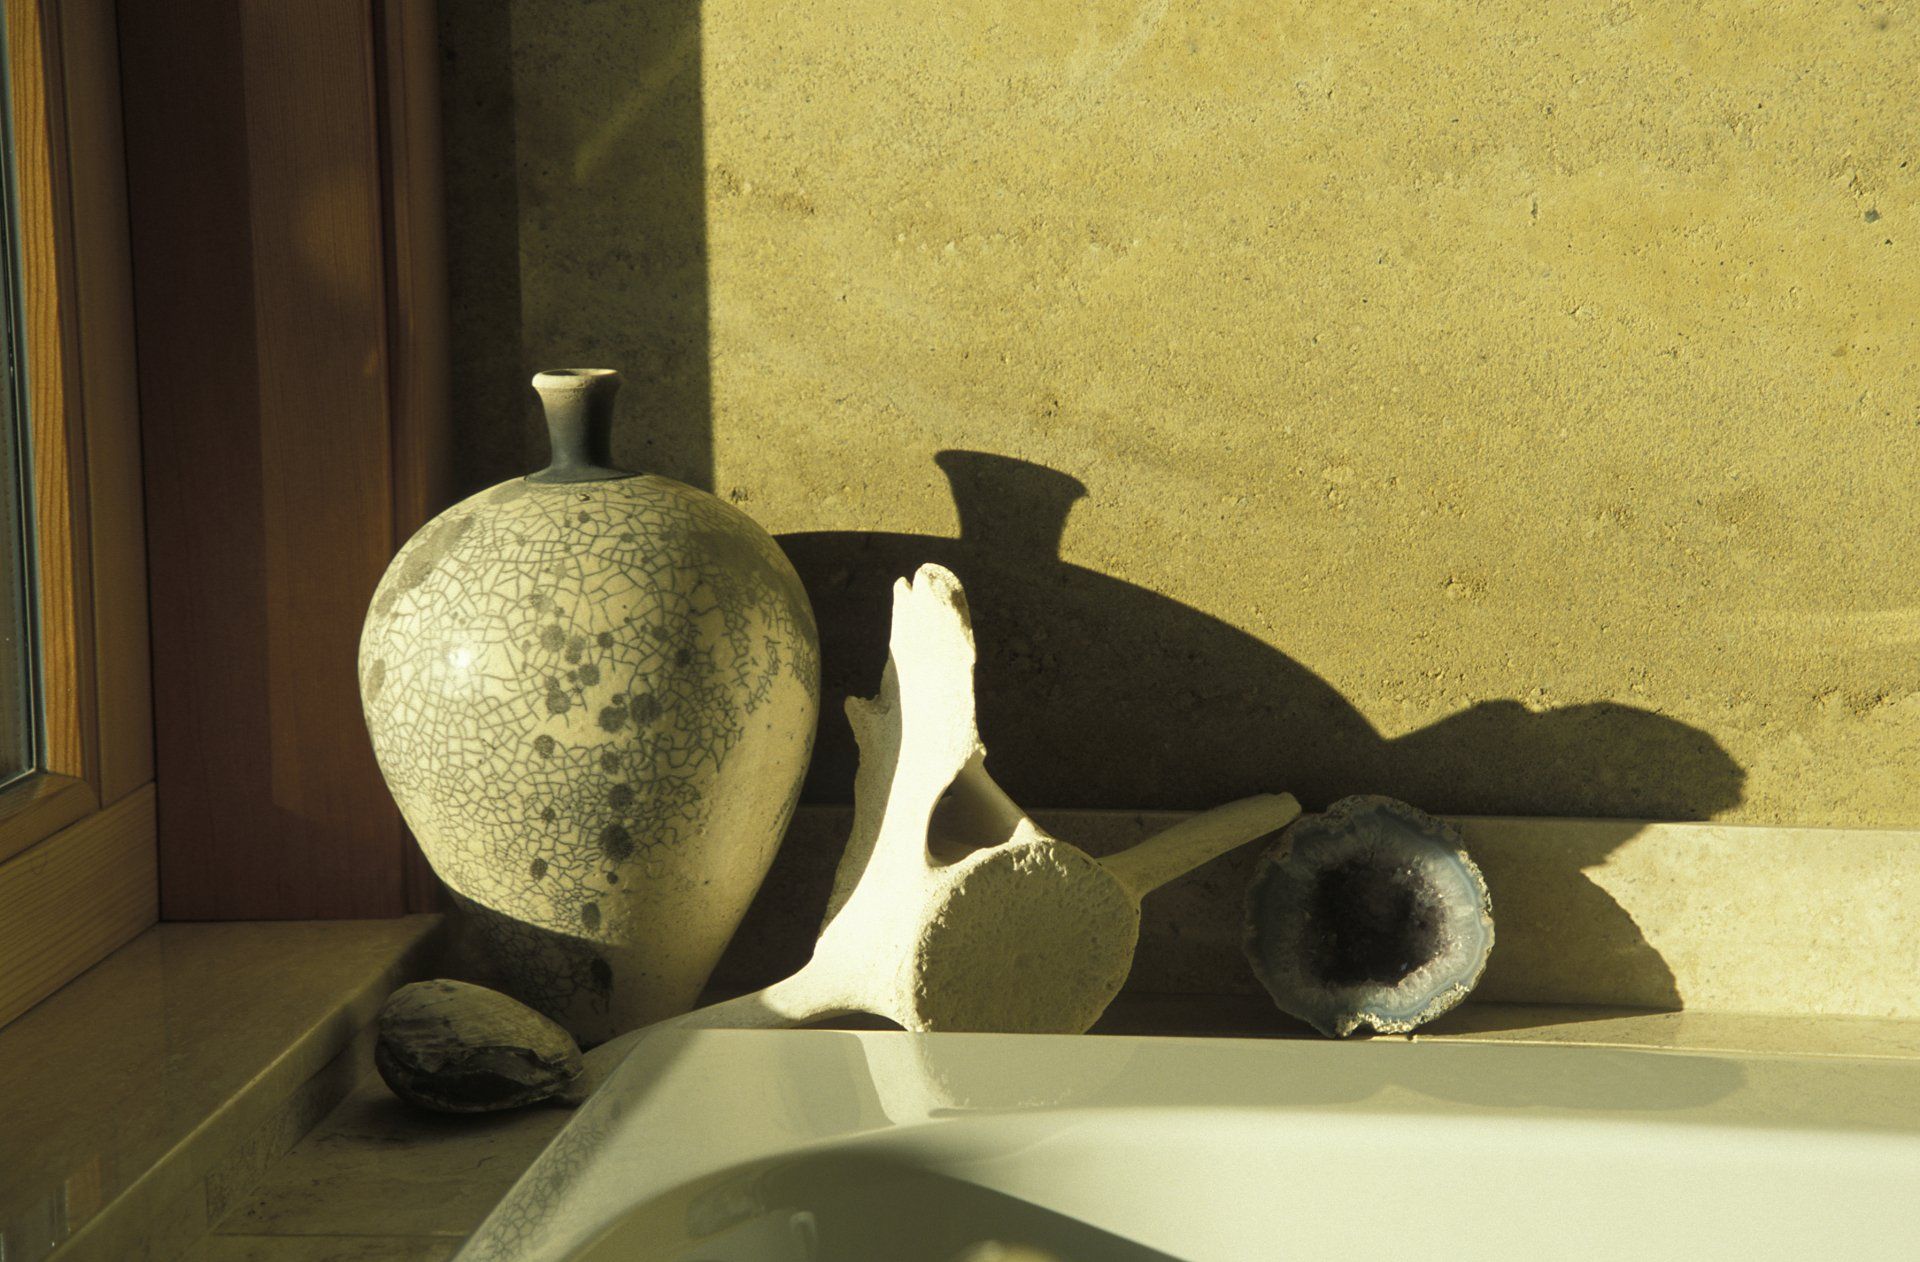 pottery vase and animal bone near a window against SIREWALL rammed earth